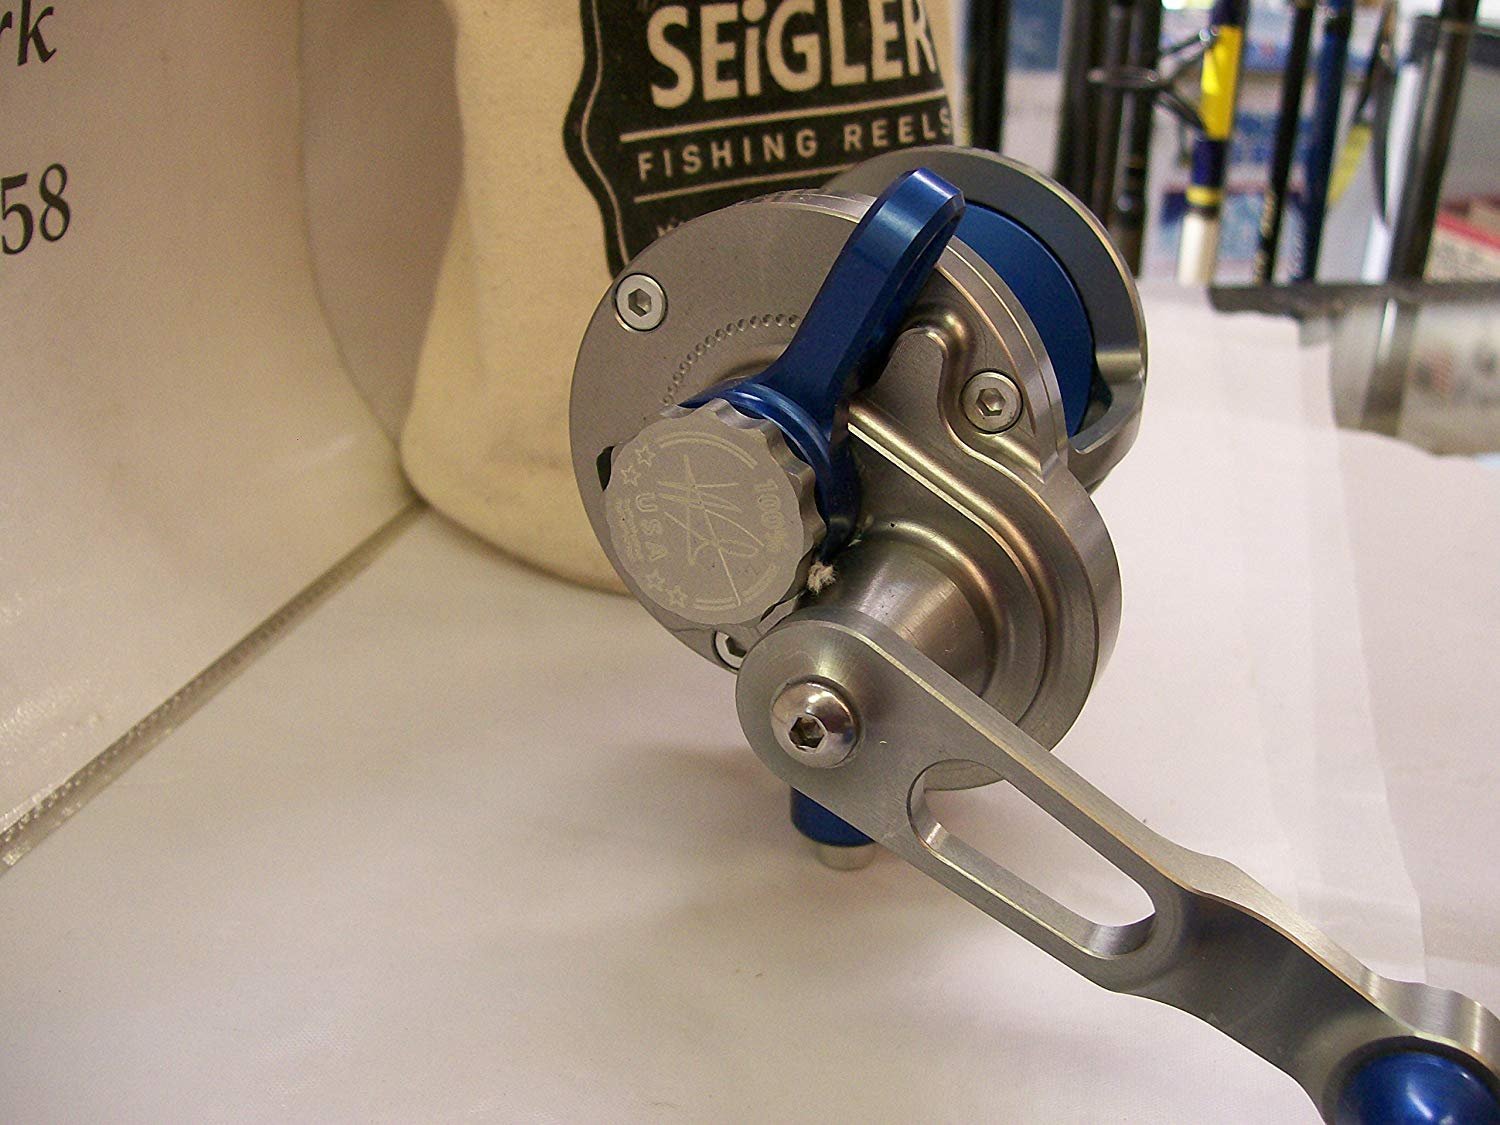 Seigler Reels (Formerly Truth Reels) Small SG Smoke/Silver – Bait